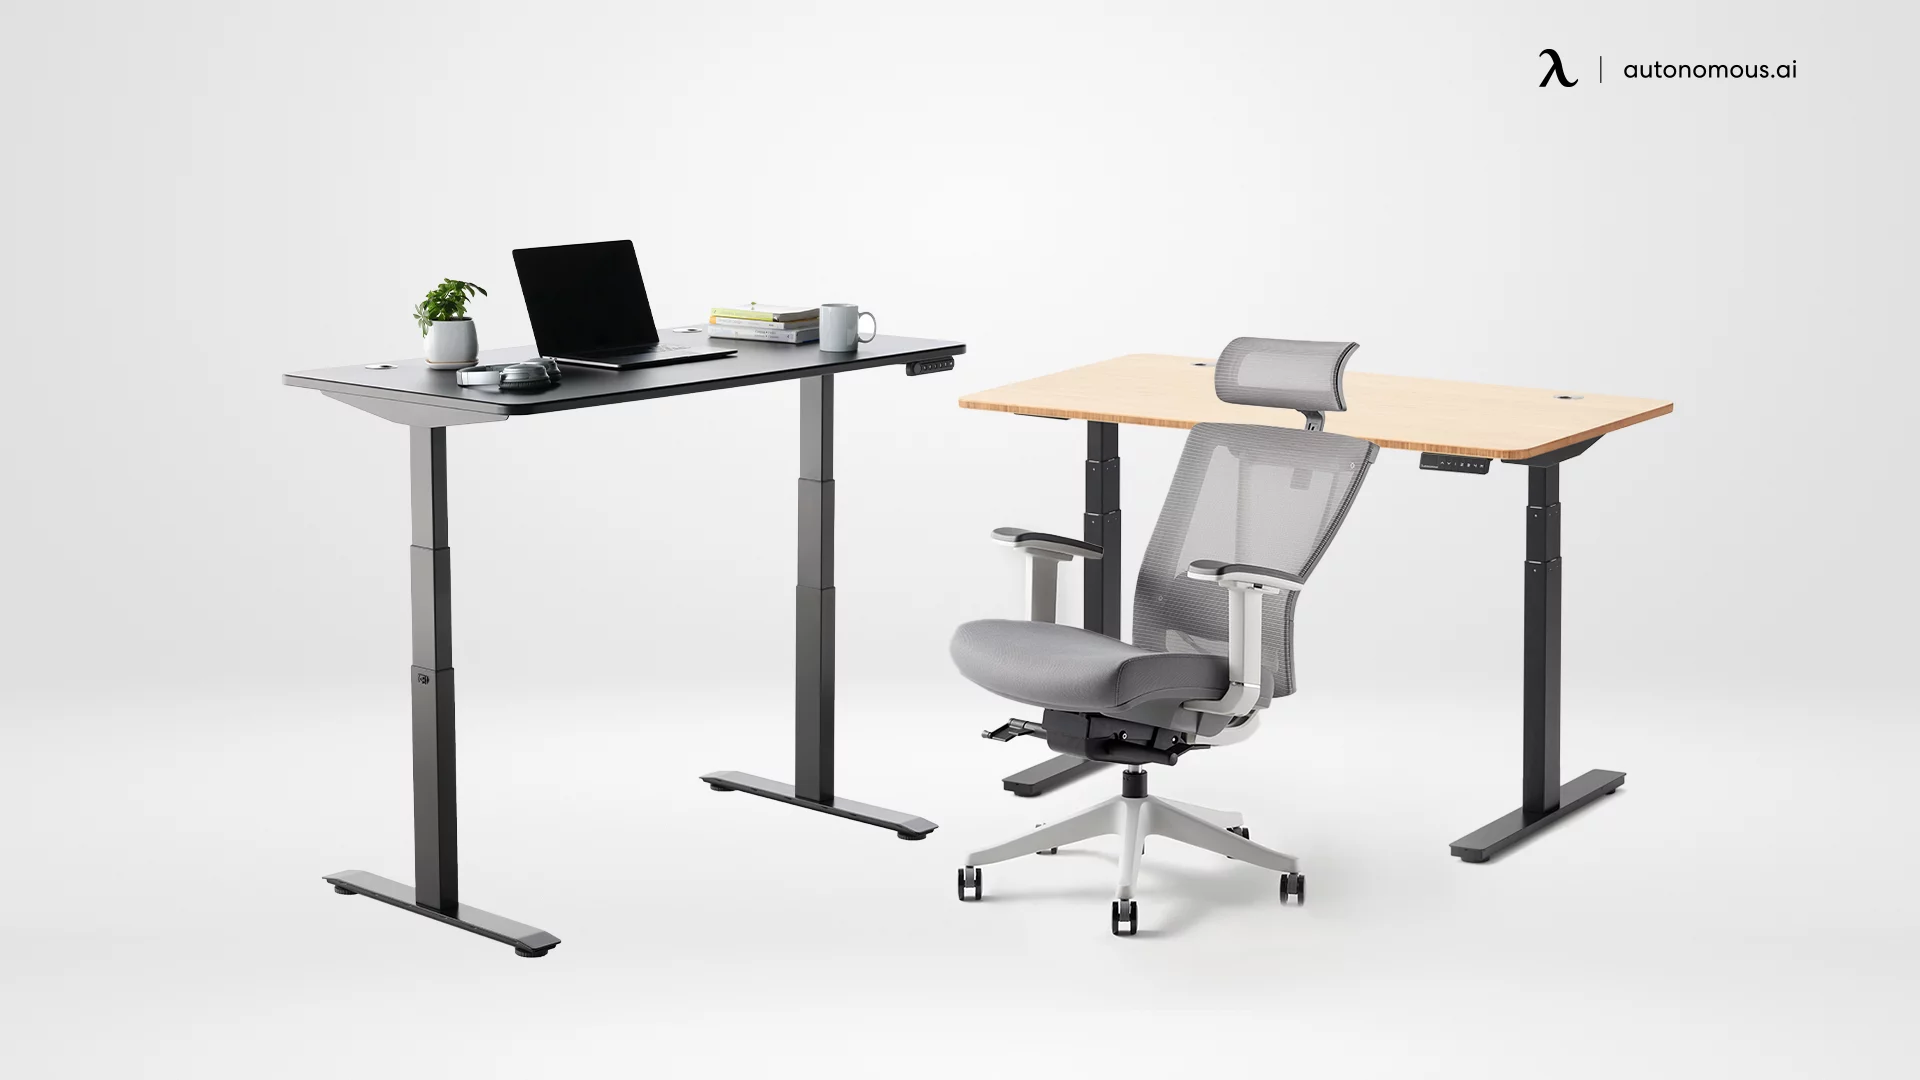 Why Should Data Scientists Use Ergonomic Furniture?